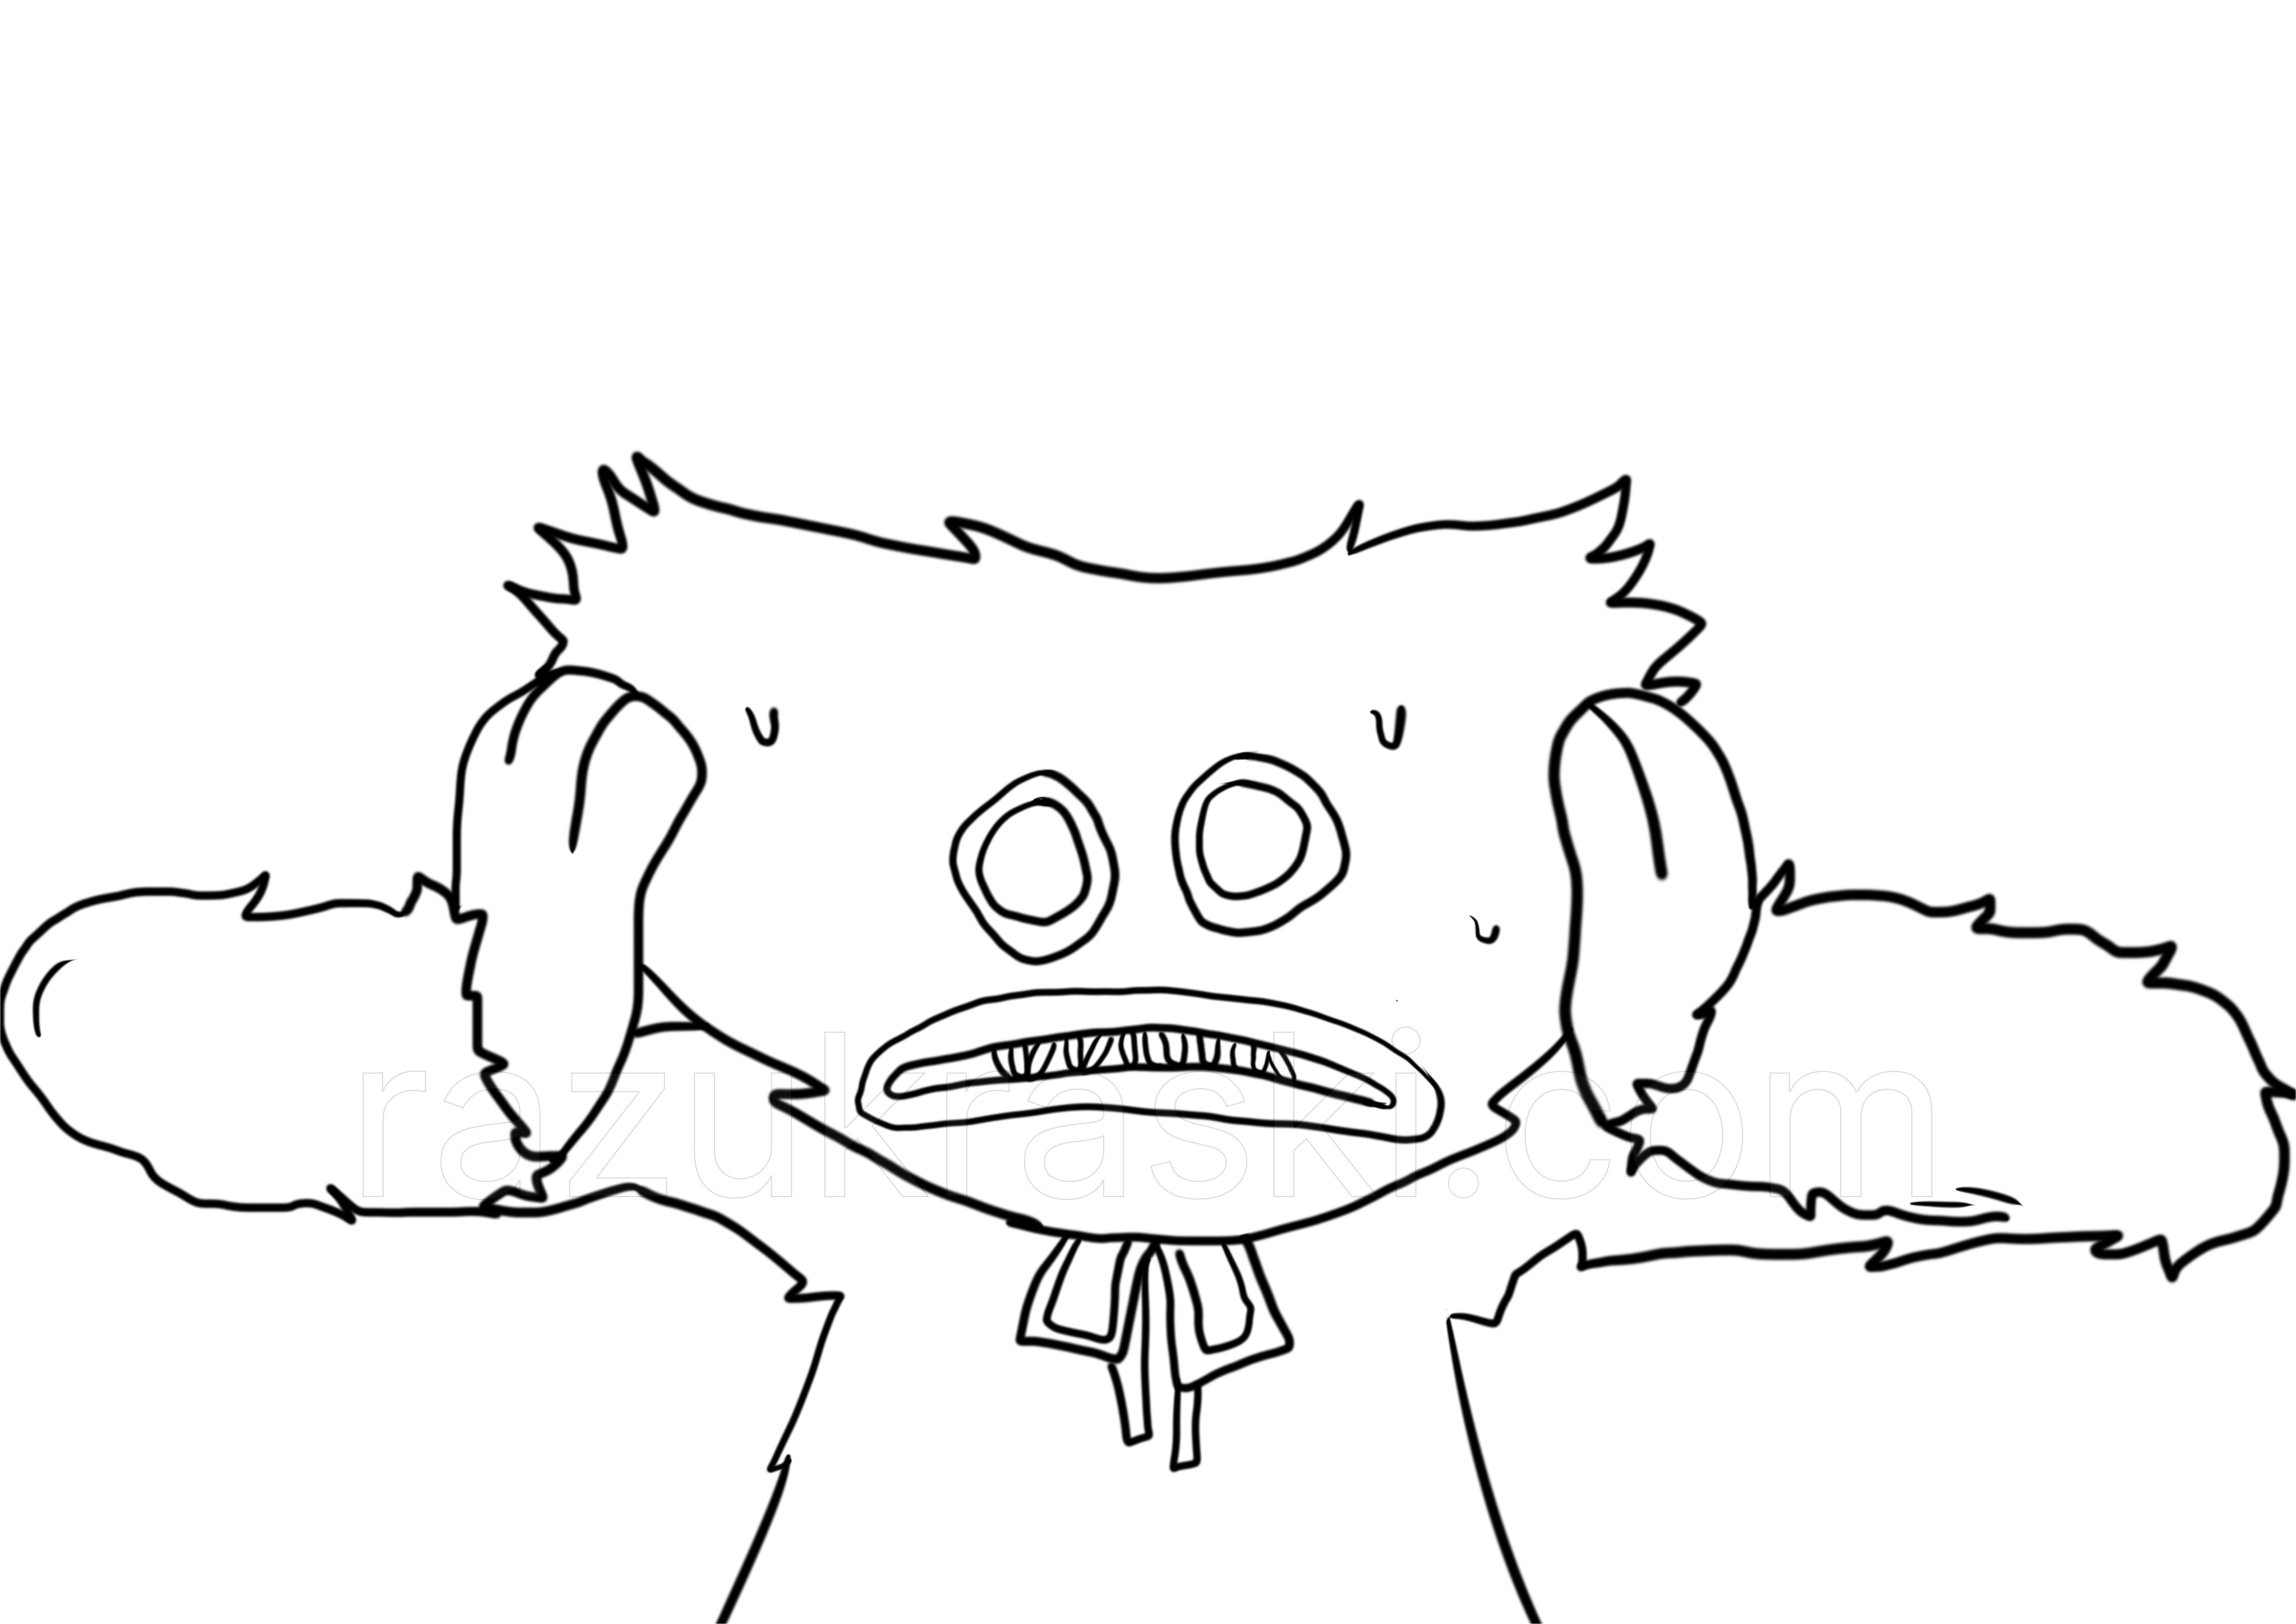 Coloring page Huggy Wuggy scared monster